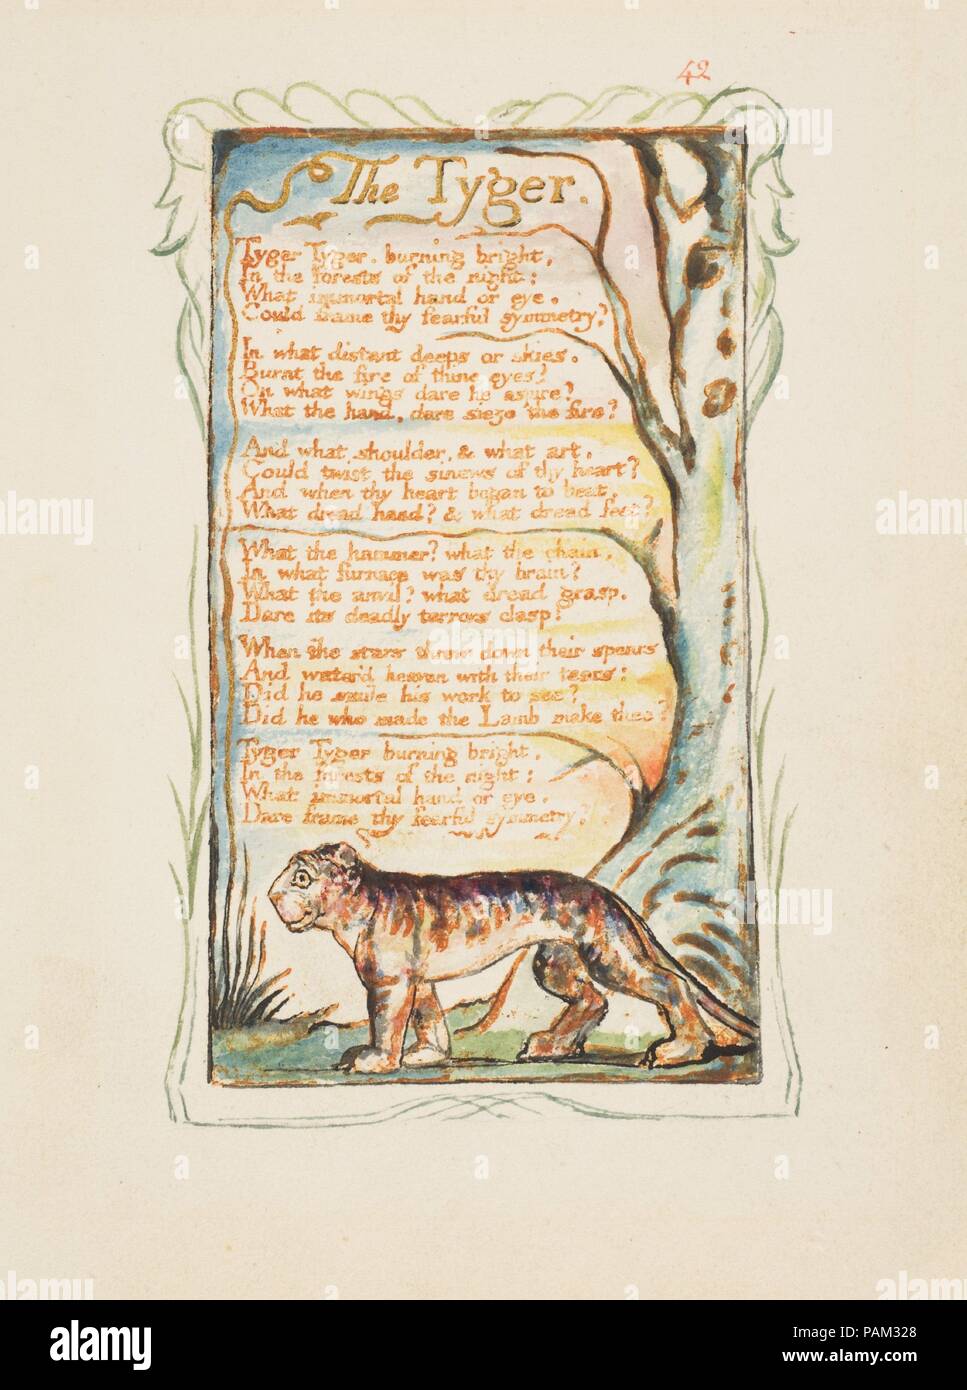 Songs of Innocence and of Experience: The Tyger. Artist: William Blake  (British, London 1757-1827 London). Dimensions: sheet: 6 3/16 x 5 9/16 in.  (15.7 x 14.1 cm). Date: ca. 1825. One of